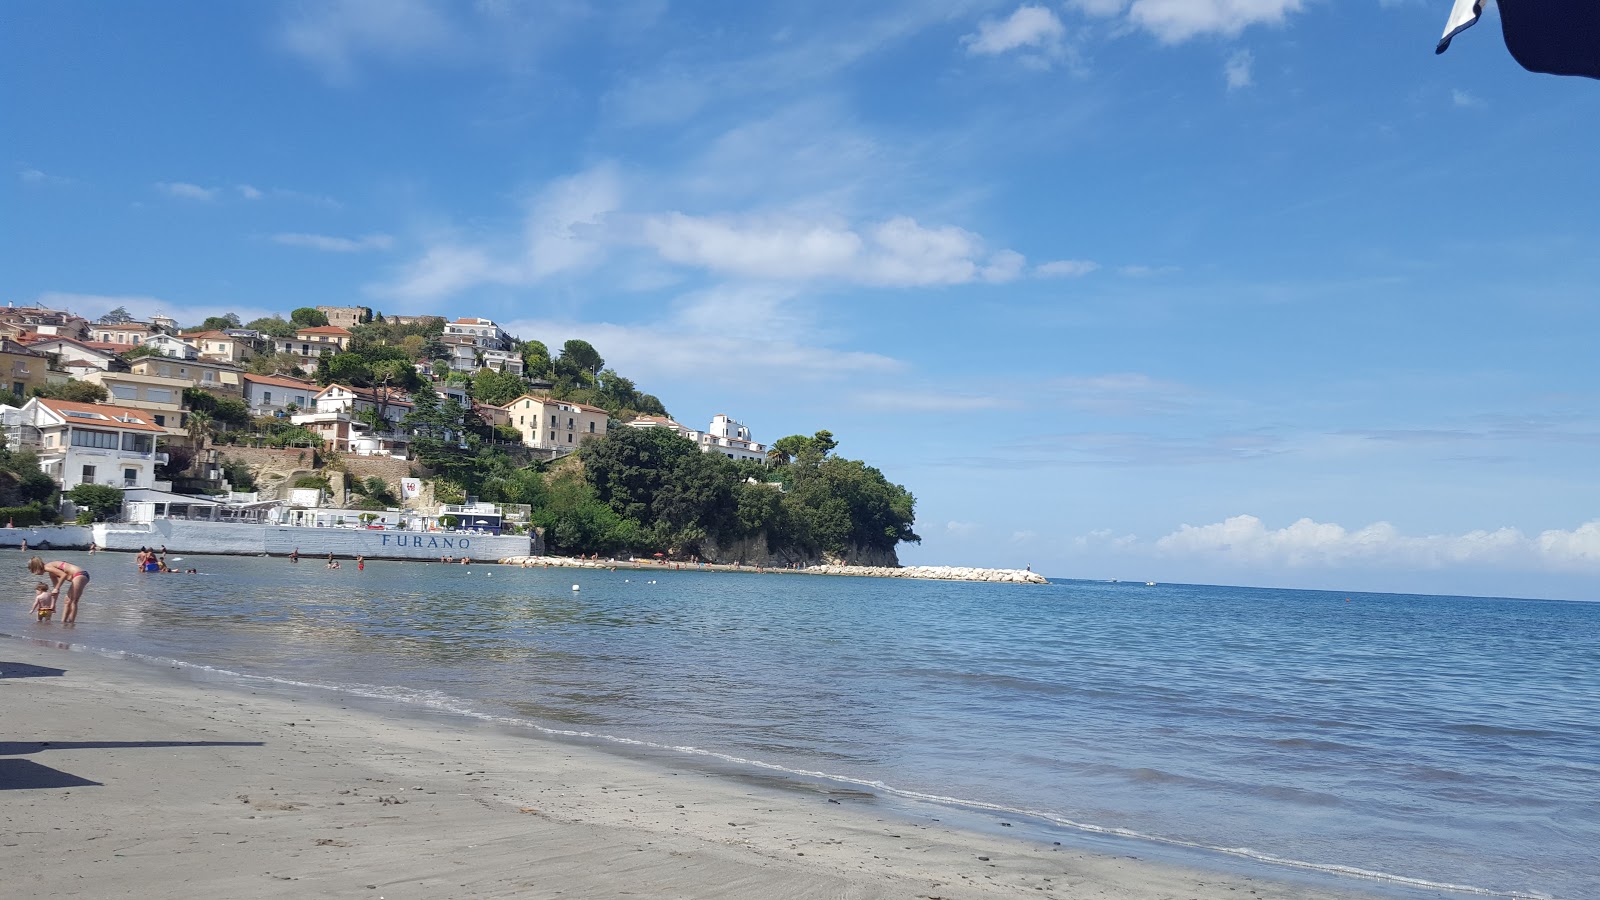 Photo of Agropoli beach with small bay